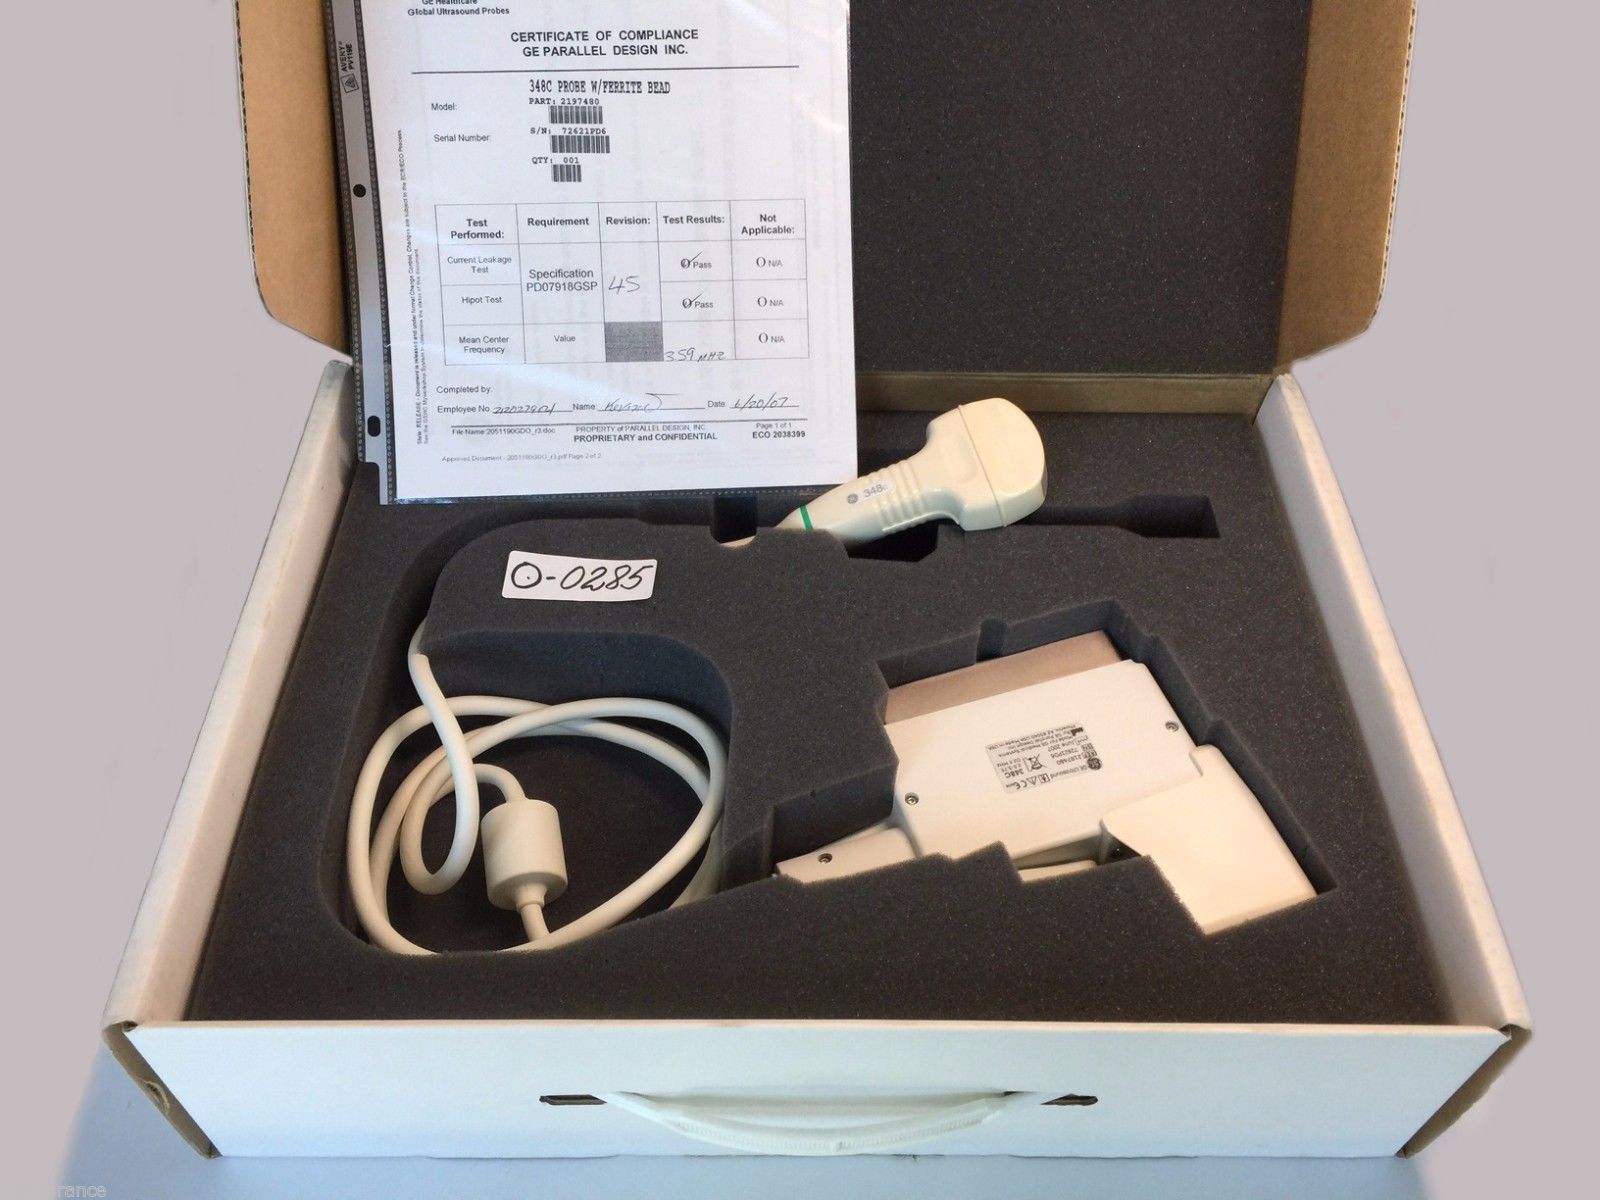 GE 348c Convex Array Probe for GE 700,700 PRO & 700 Exp.refurbished DIAGNOSTIC ULTRASOUND MACHINES FOR SALE